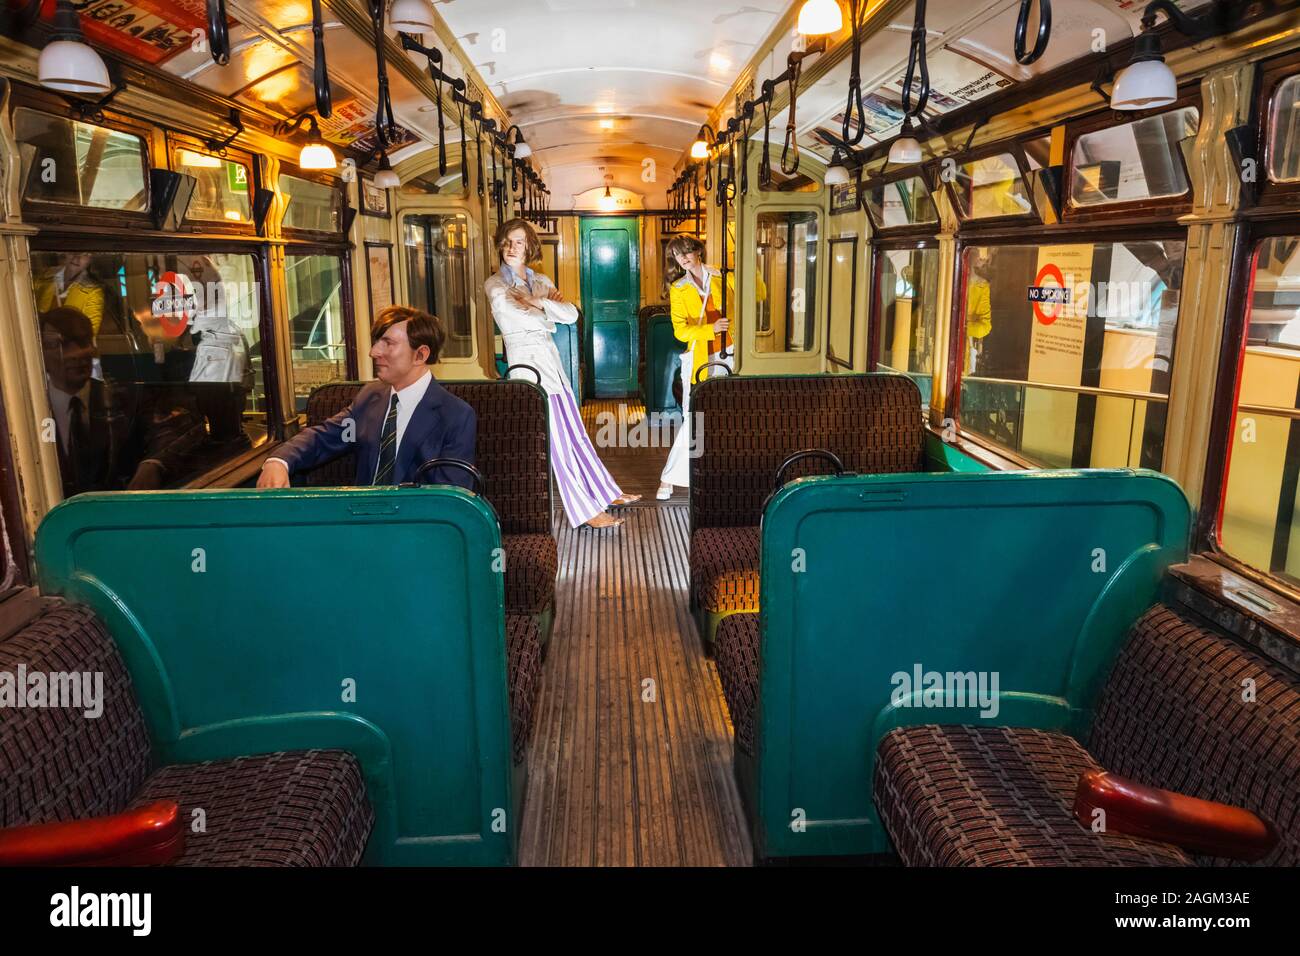 England, London, Covent Garden, London Transport Museum, Display of Vintage Underground Train Carriage Stock Photo